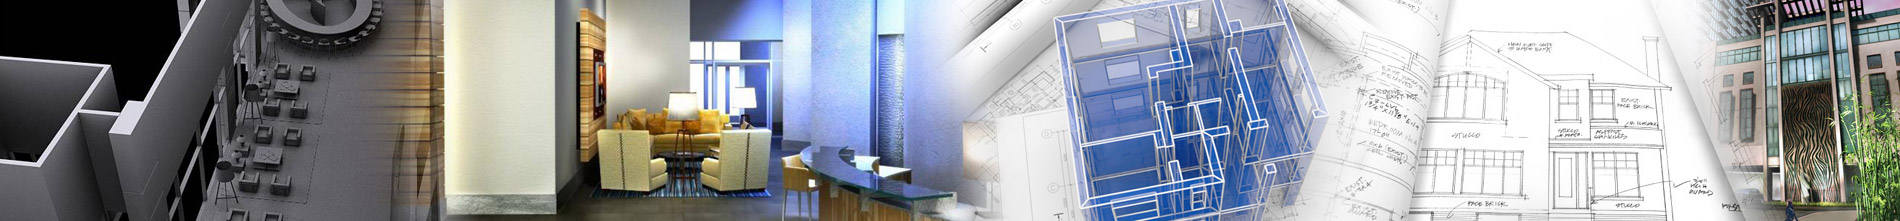 Design solutions for the Architectural, Engineering and Construction (A/E/C) industry